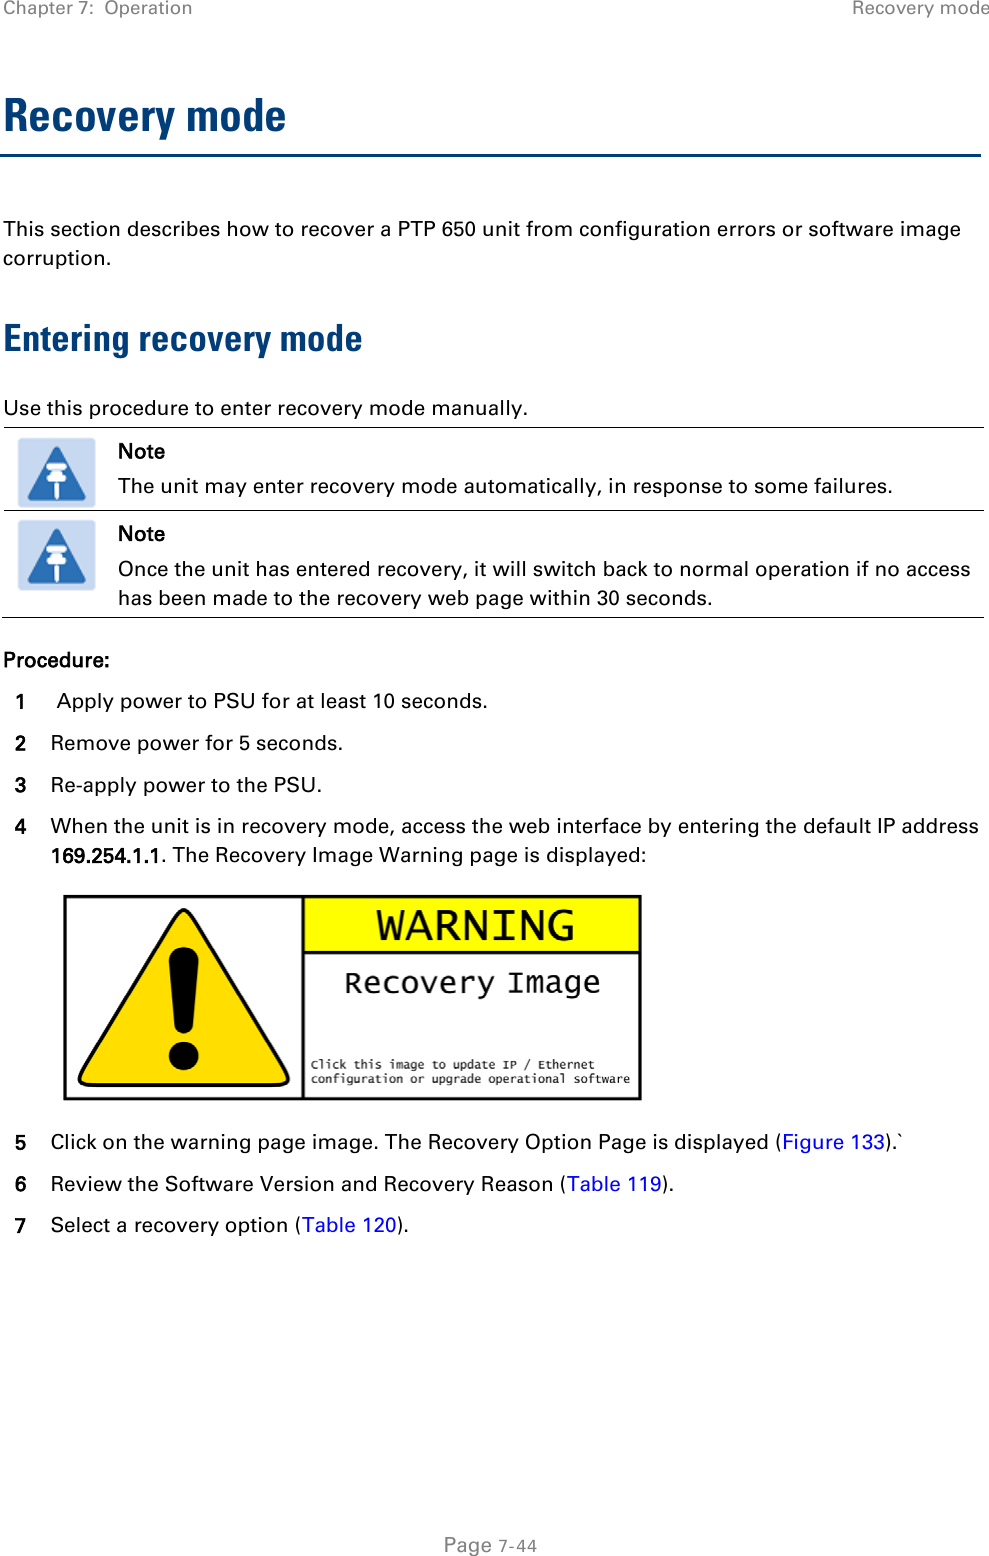 Chapter 7:  Operation Recovery mode  Recovery mode This section describes how to recover a PTP 650 unit from configuration errors or software image corruption. Entering recovery mode Use this procedure to enter recovery mode manually.   Note The unit may enter recovery mode automatically, in response to some failures.  Note Once the unit has entered recovery, it will switch back to normal operation if no access has been made to the recovery web page within 30 seconds. Procedure: 1  Apply power to PSU for at least 10 seconds. 2 Remove power for 5 seconds. 3 Re-apply power to the PSU. 4 When the unit is in recovery mode, access the web interface by entering the default IP address 169.254.1.1. The Recovery Image Warning page is displayed:  5 Click on the warning page image. The Recovery Option Page is displayed (Figure 133).` 6 Review the Software Version and Recovery Reason (Table 119). 7 Select a recovery option (Table 120).   Page 7-44 